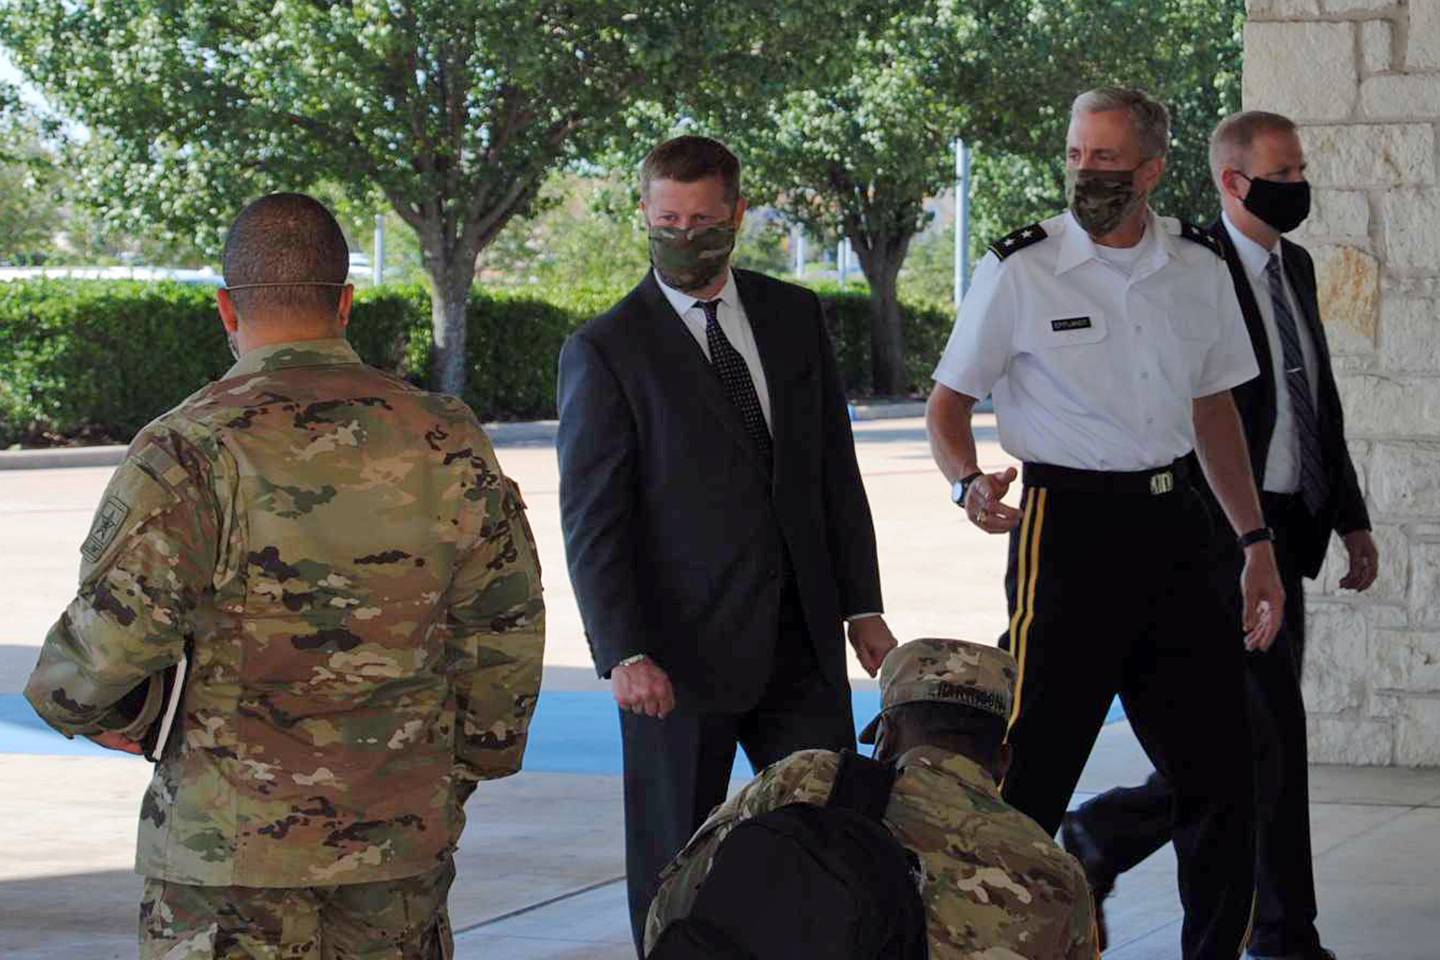 Secretary of the Army Ryan McCarthy, center, into the Killeen Civic and Conference Center on Aug. 6, 2020, ahead of a meeting with local officials in Killeen, Texas.